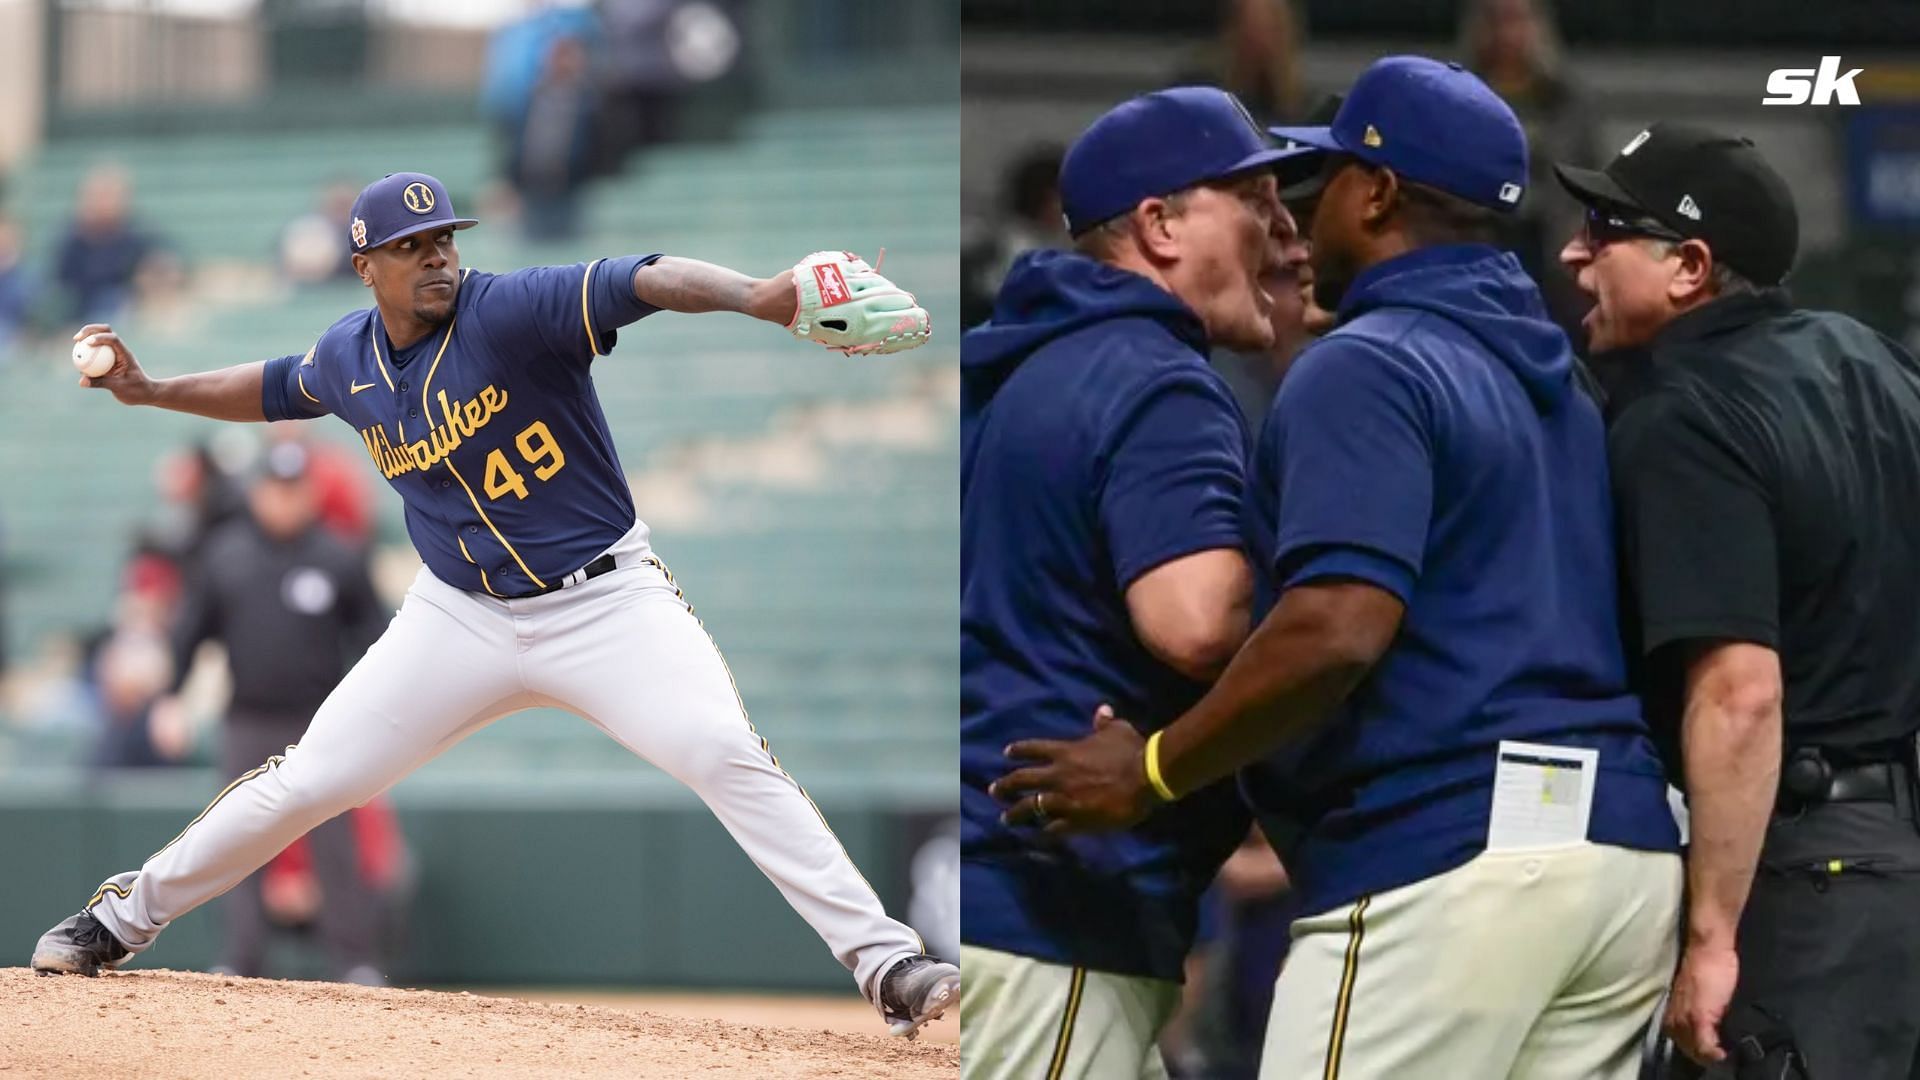 WATCH: Umpires confiscate Brewers reliever Thyago Vieira